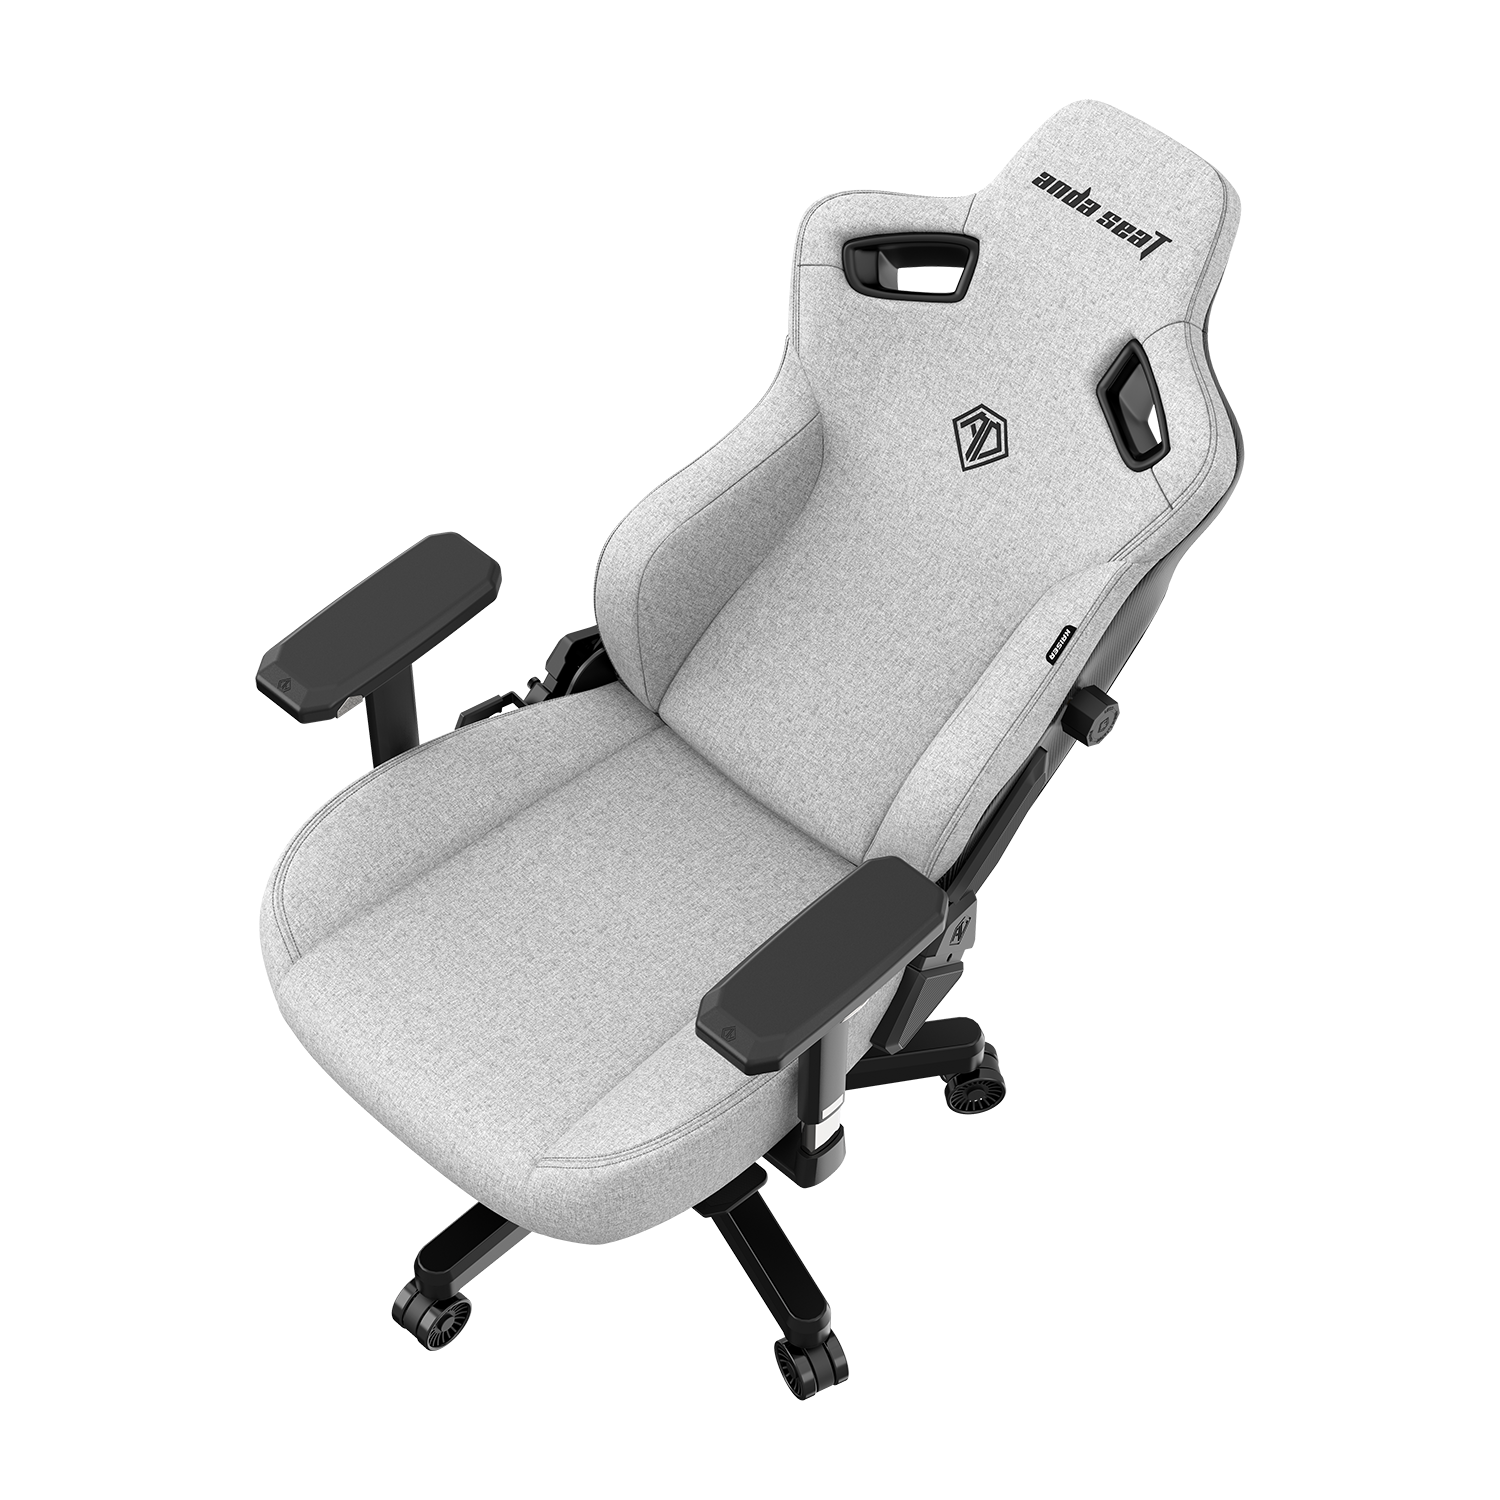 ANDASEAT KAISER 3 L SIZE EVERSOFT LINEN FABRIC - ASH GRAY GAMING CHAIR